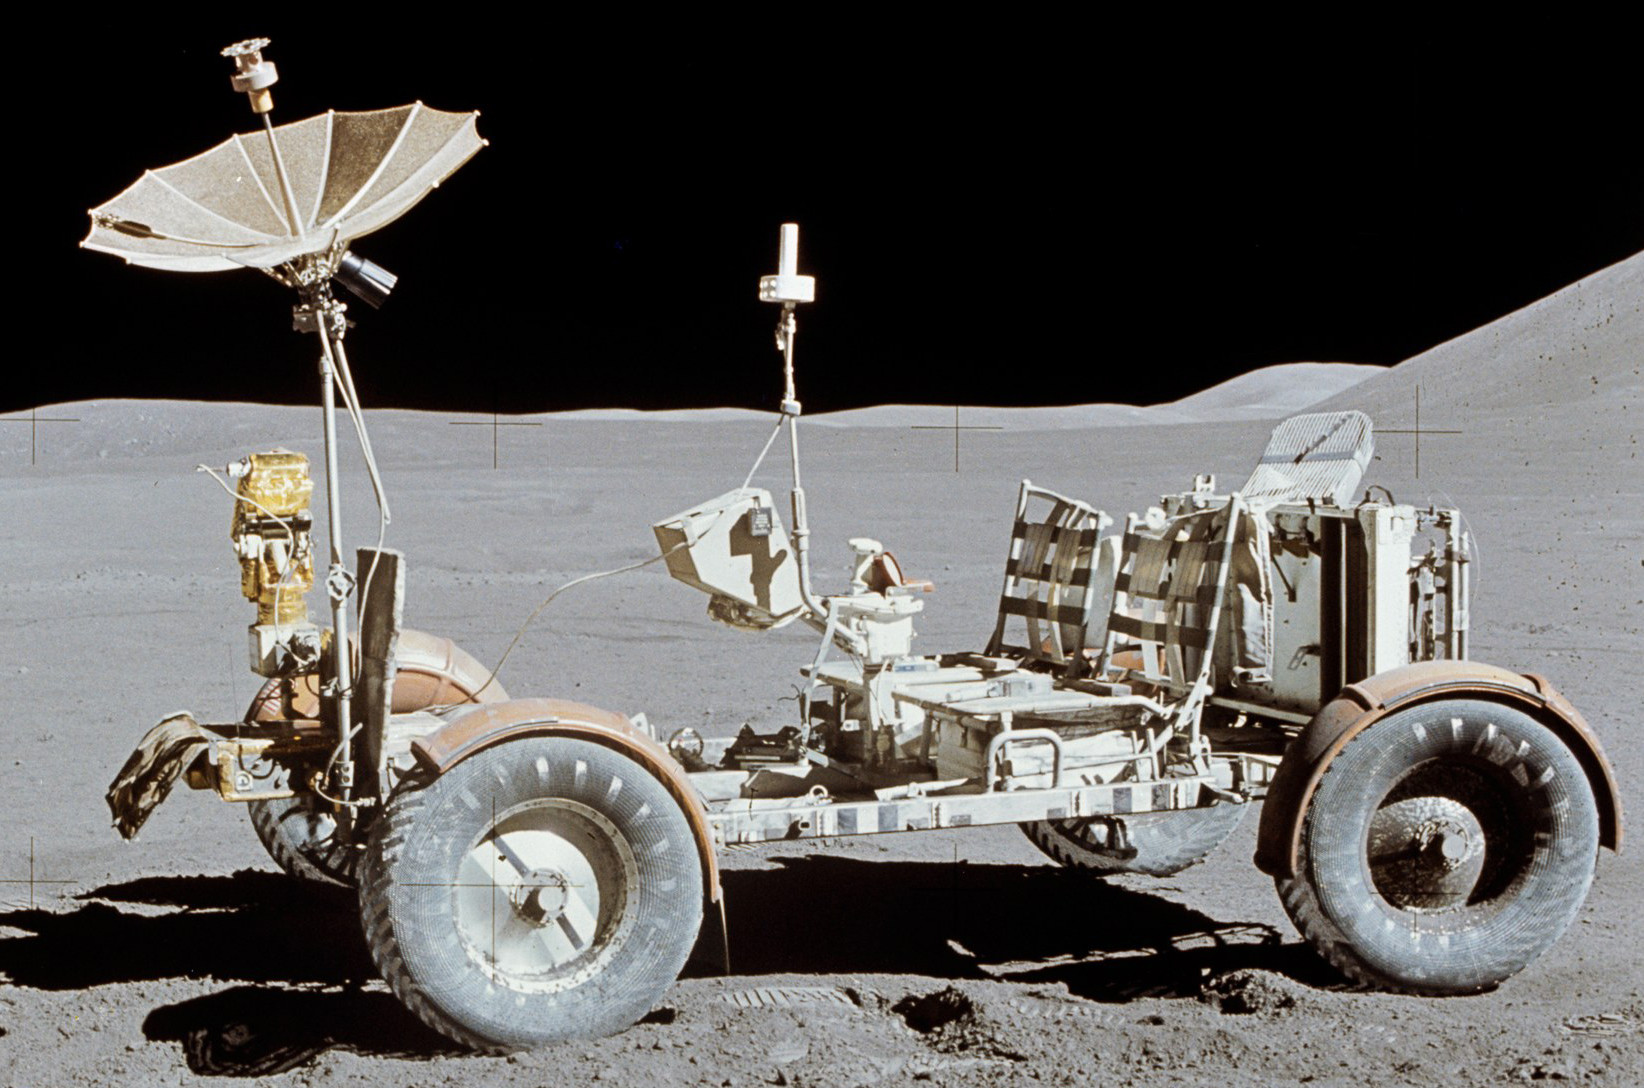 The lunar rover turns 44 today